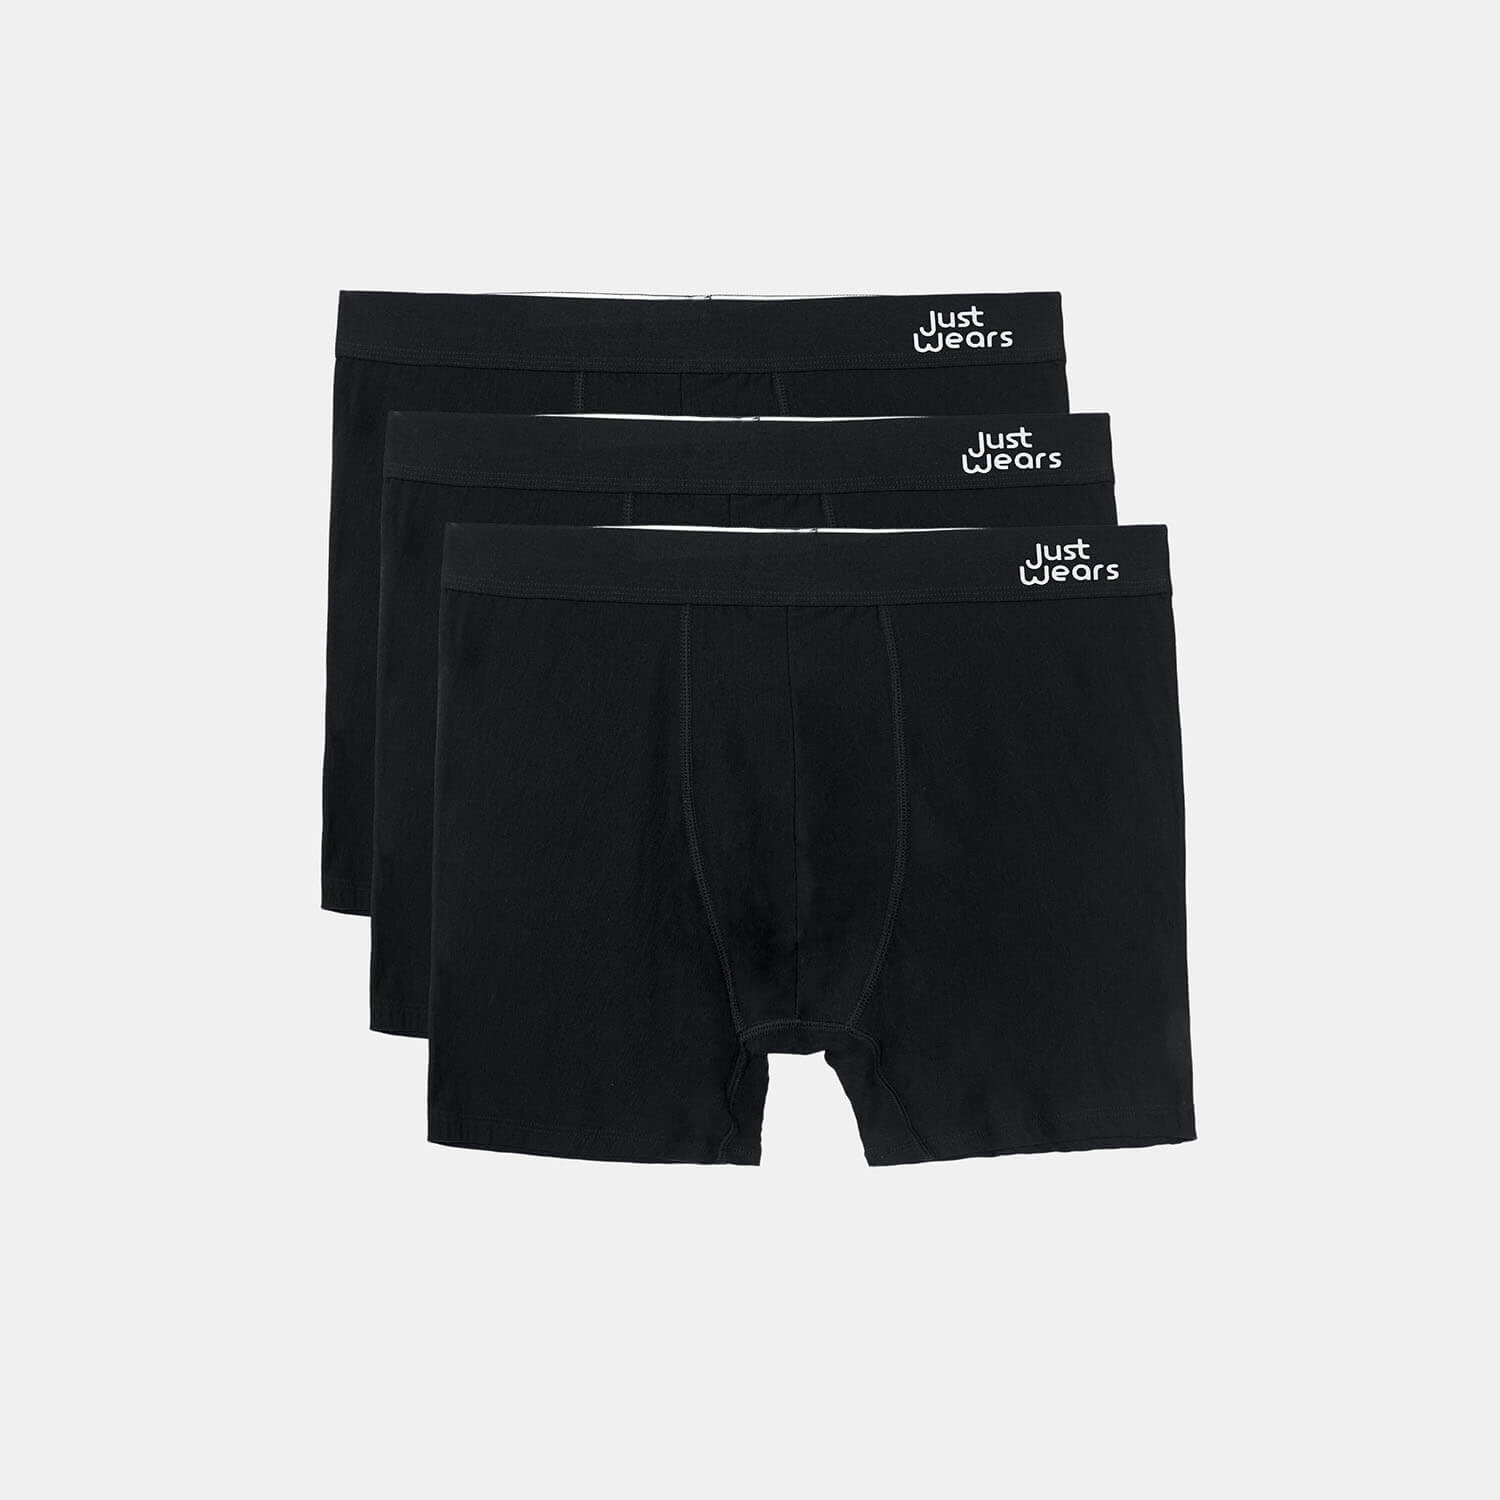 Men's Boxer Briefs With A Pouch | Anti-Chafing Boxers, 5x Softer Than ...